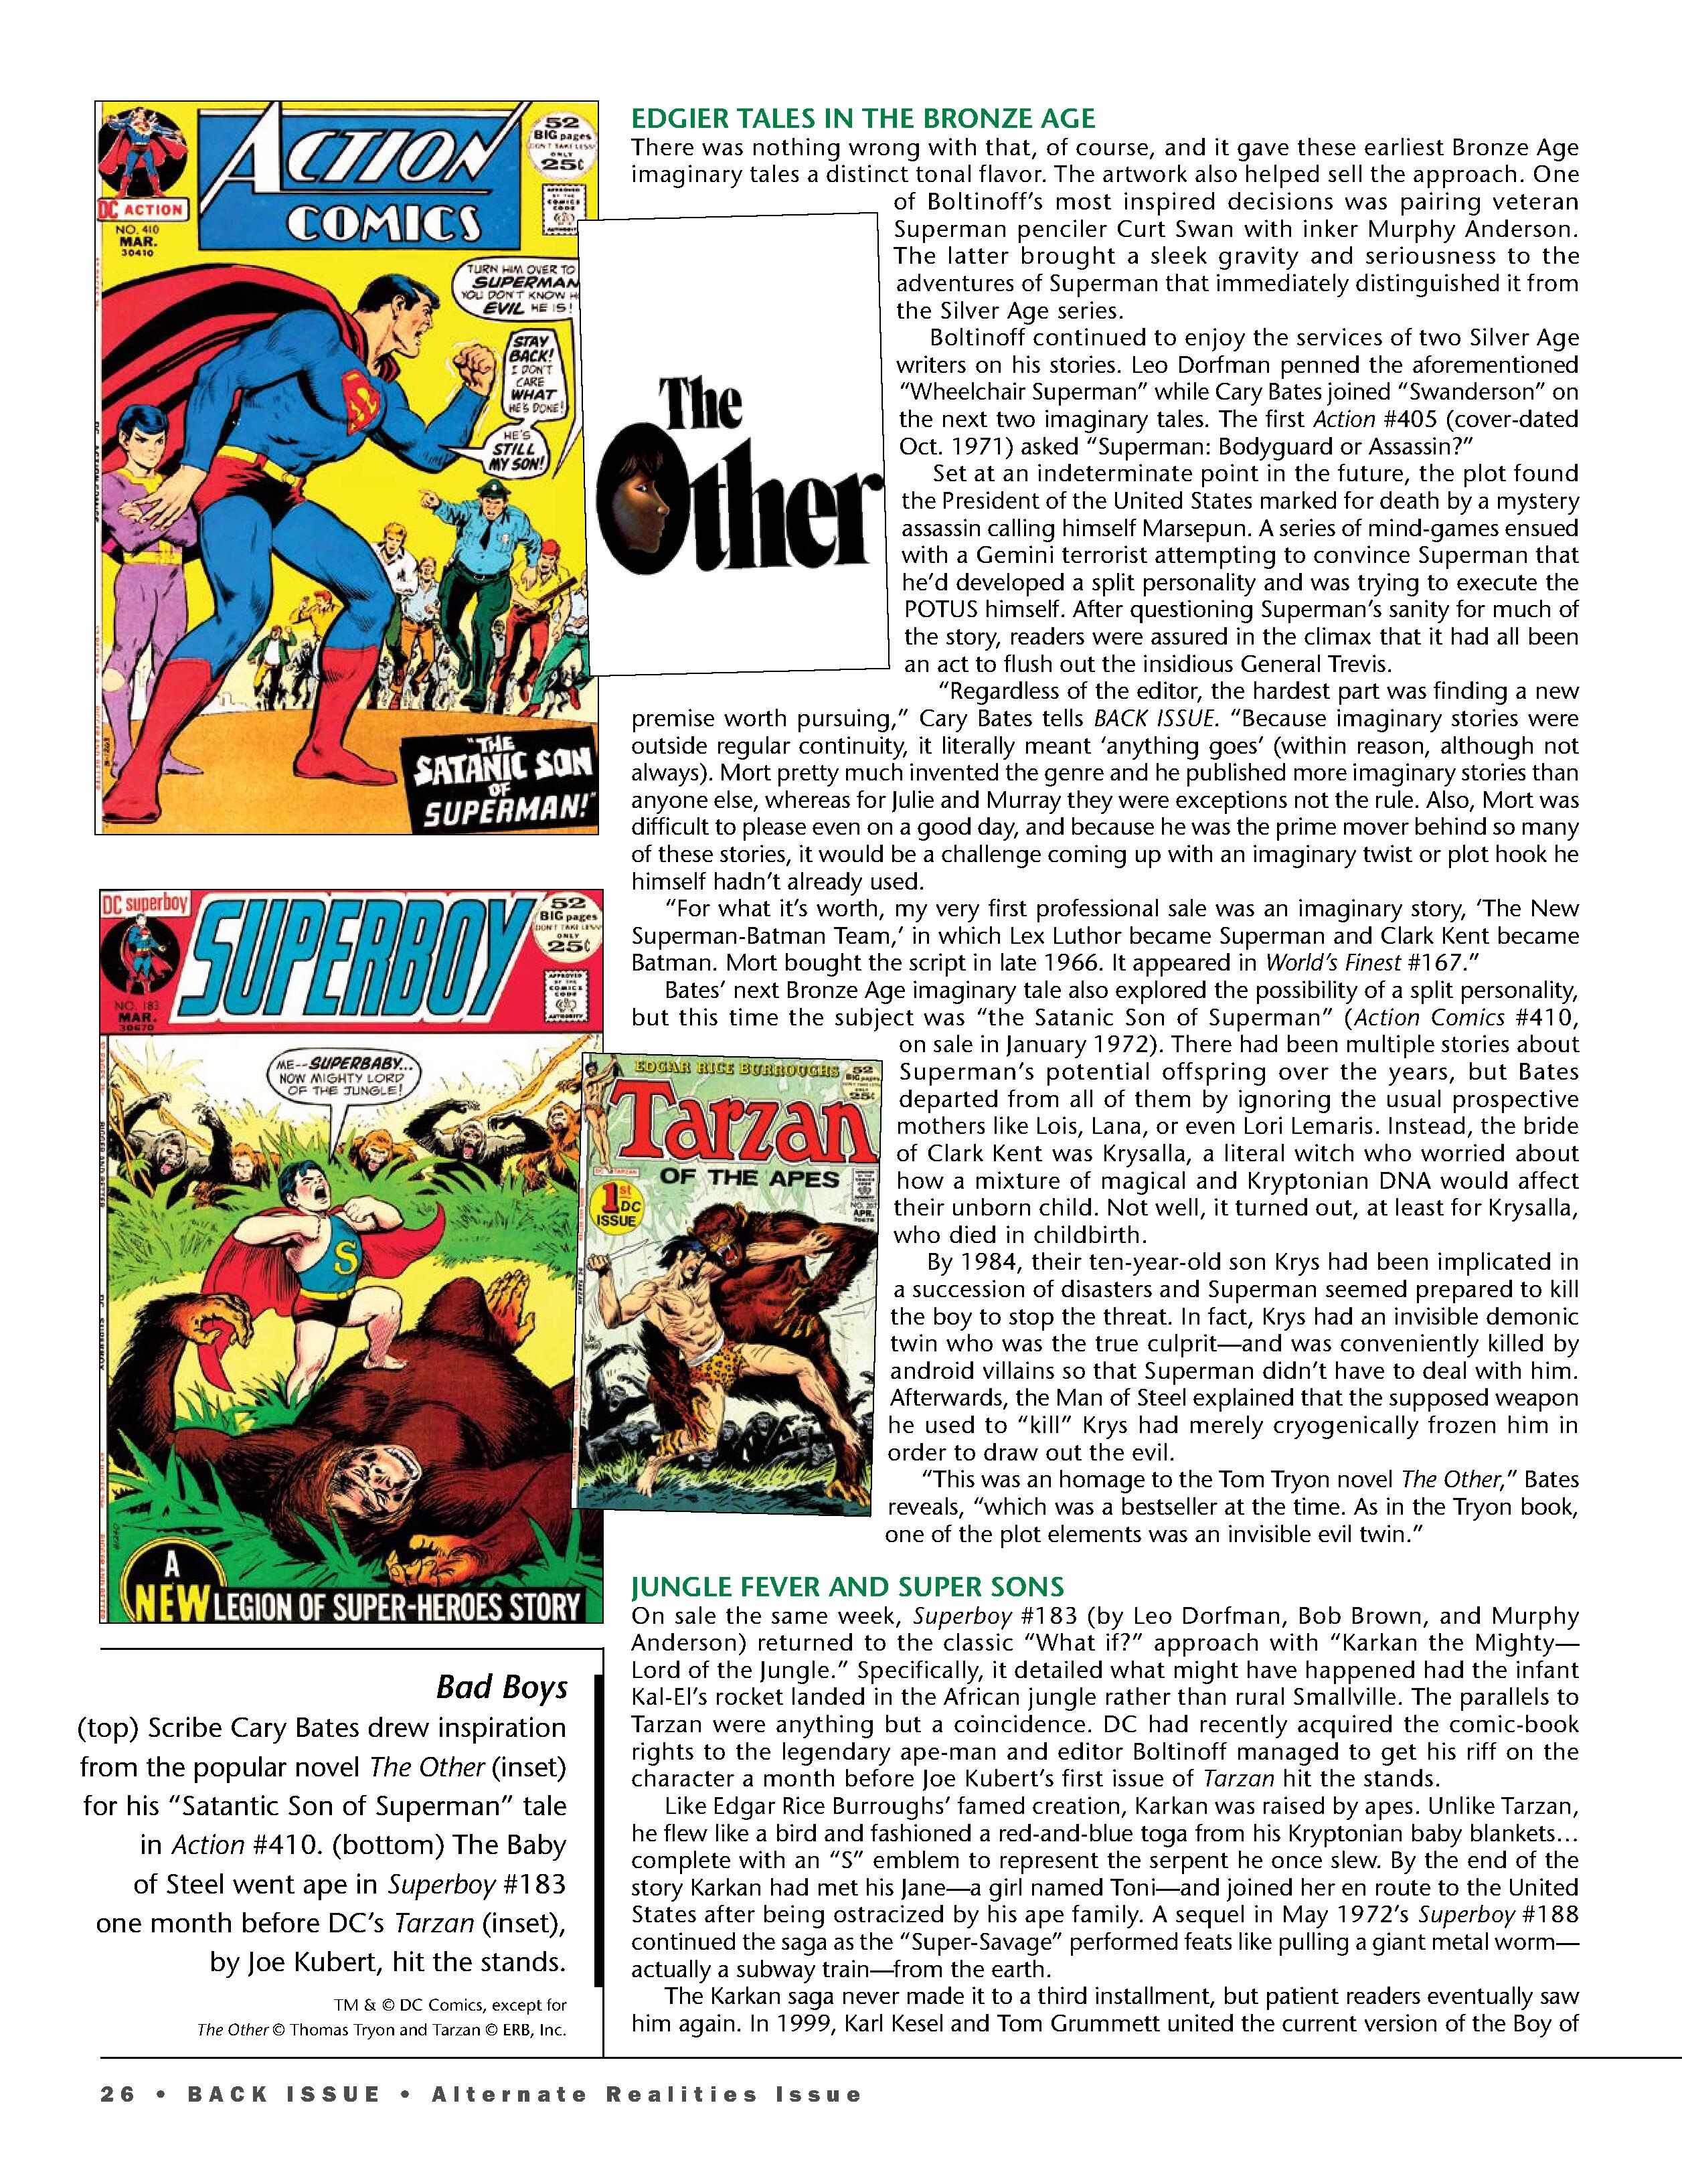 Read online Back Issue comic -  Issue #111 - 28